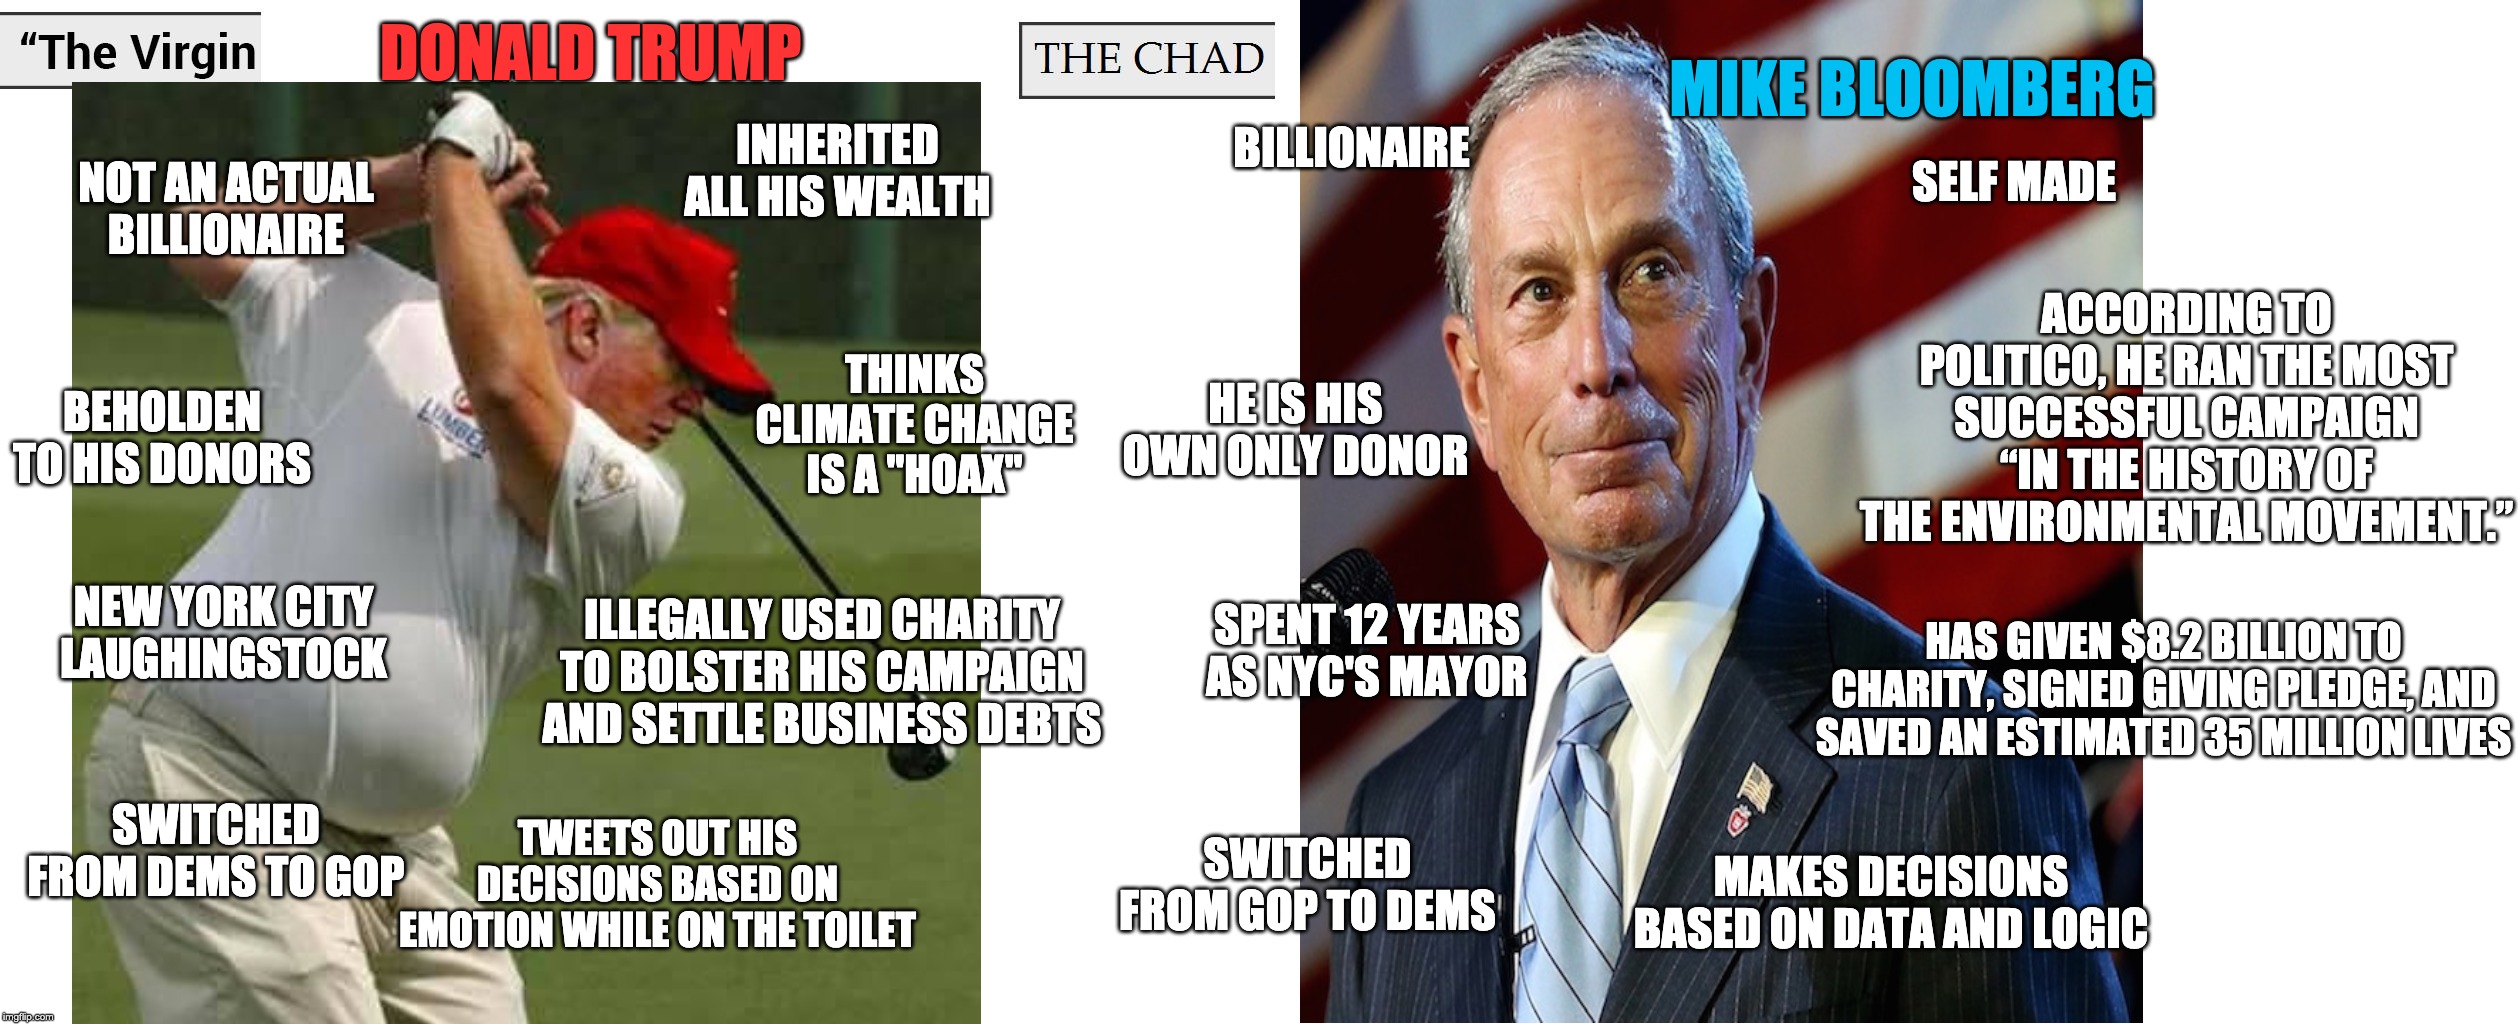 Virgin Donald vs Chad Mike | DONALD TRUMP; MIKE BLOOMBERG; BILLIONAIRE; INHERITED ALL HIS WEALTH; SELF MADE; NOT AN ACTUAL BILLIONAIRE; ACCORDING TO POLITICO, HE RAN THE MOST SUCCESSFUL CAMPAIGN “IN THE HISTORY OF THE ENVIRONMENTAL MOVEMENT.”; THINKS CLIMATE CHANGE IS A "HOAX"; HE IS HIS OWN ONLY DONOR; BEHOLDEN TO HIS DONORS; NEW YORK CITY LAUGHINGSTOCK; SPENT 12 YEARS AS NYC'S MAYOR; ILLEGALLY USED CHARITY TO BOLSTER HIS CAMPAIGN AND SETTLE BUSINESS DEBTS; HAS GIVEN $8.2 BILLION TO CHARITY, SIGNED GIVING PLEDGE, AND SAVED AN ESTIMATED 35 MILLION LIVES; TWEETS OUT HIS DECISIONS BASED ON EMOTION WHILE ON THE TOILET; SWITCHED FROM DEMS TO GOP; MAKES DECISIONS BASED ON DATA AND LOGIC; SWITCHED FROM GOP TO DEMS | image tagged in virgin and chad,donald trump,2020 elections,election 2020,neoliberal | made w/ Imgflip meme maker